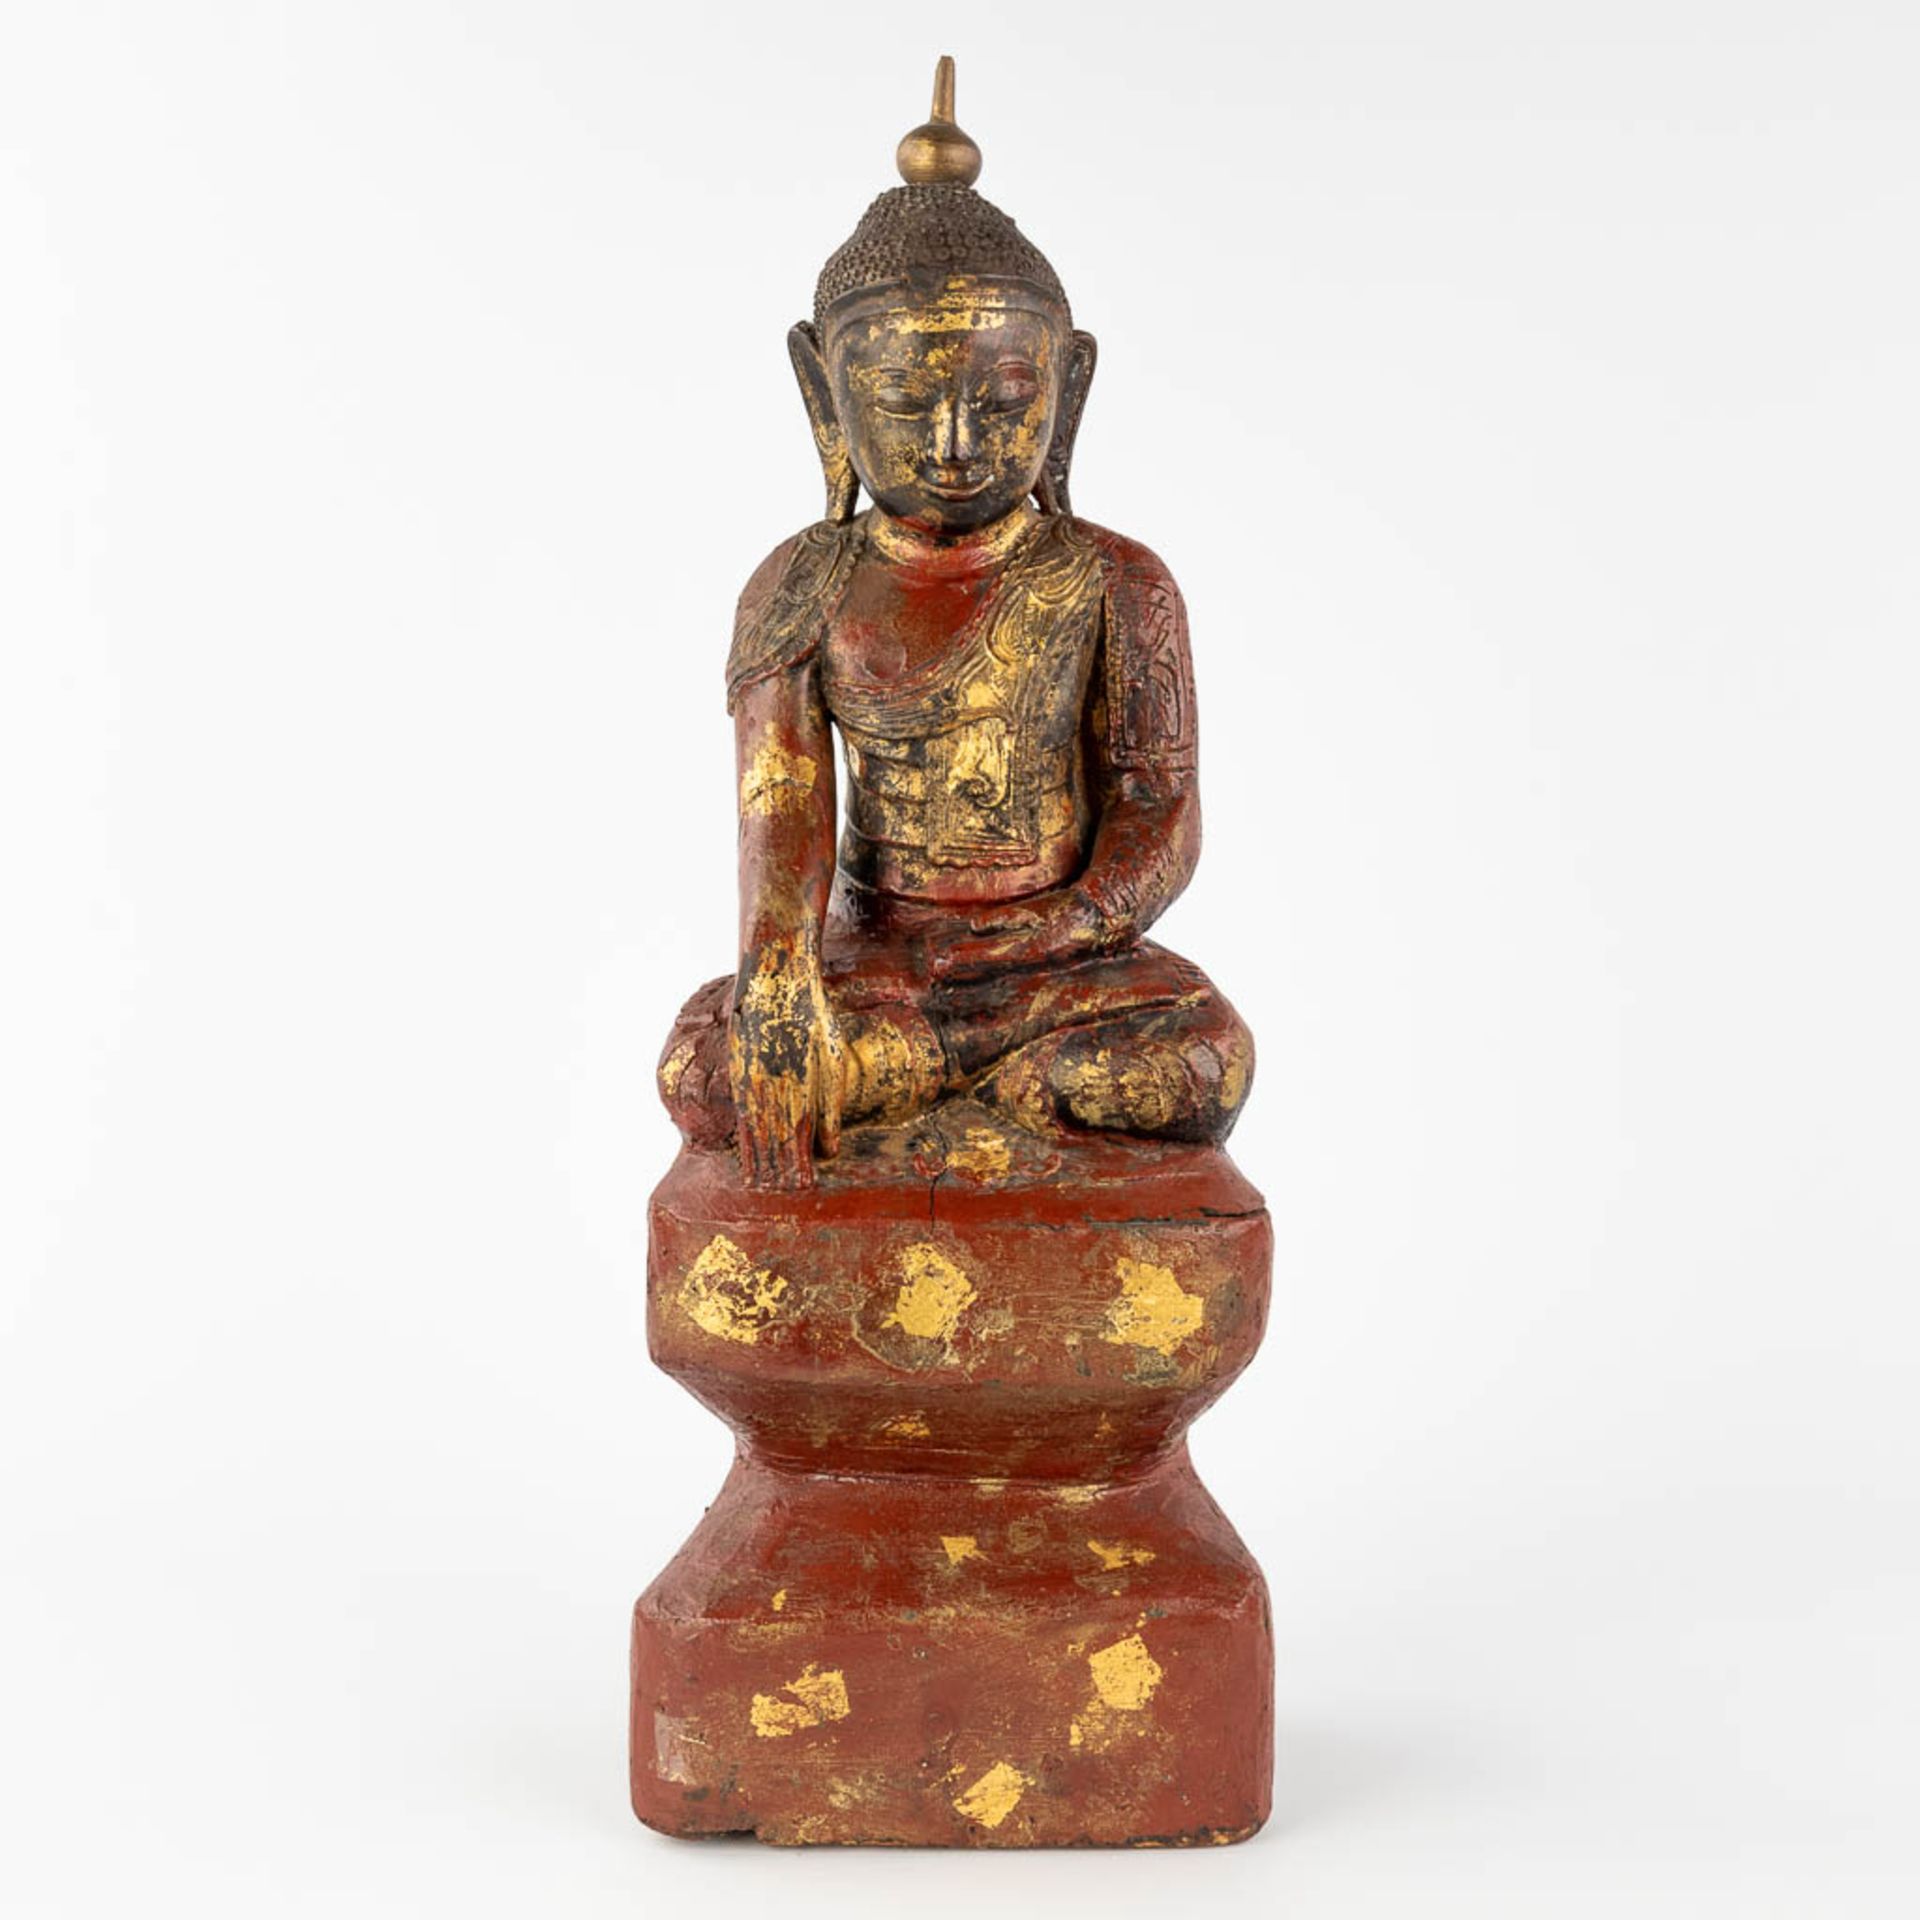 A collection of two wood-sculptured buddha statues, 19th/20th C. (W: 29 x H: 60 cm) - Image 14 of 27